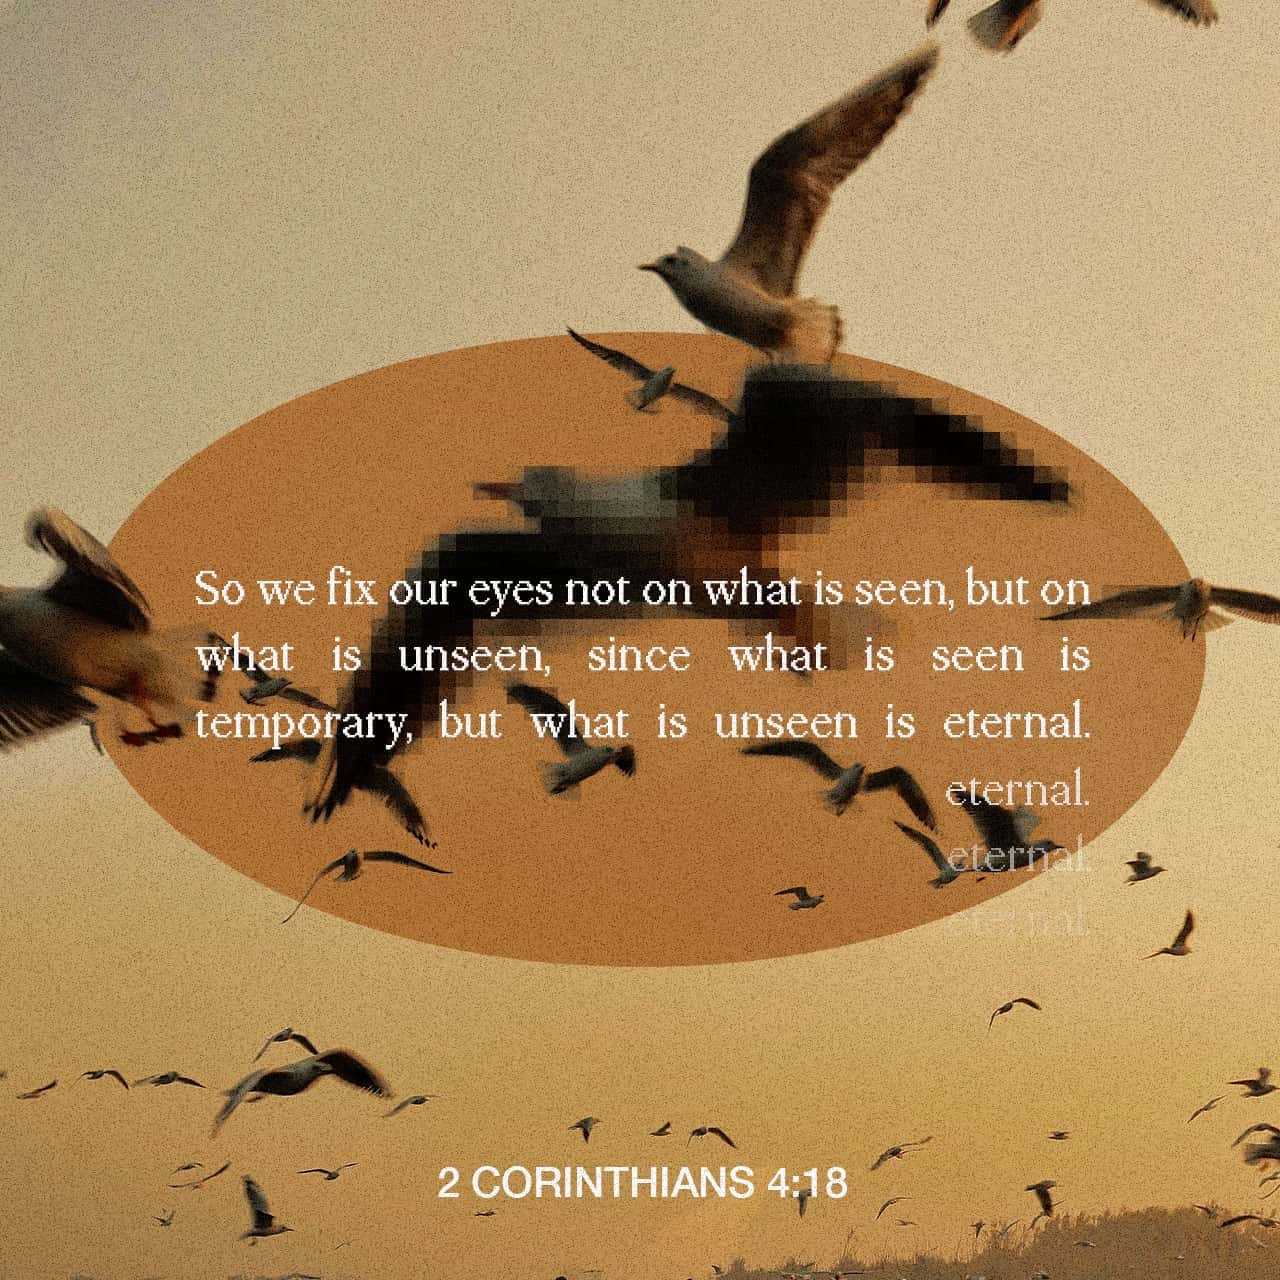 So we fix our eyes not on what is seen, but on what is unseen, since what is seen is temporary, but what is unseen is eternal. - 2 Corinthians 4:18 https://t.co/vy5r97q1WG